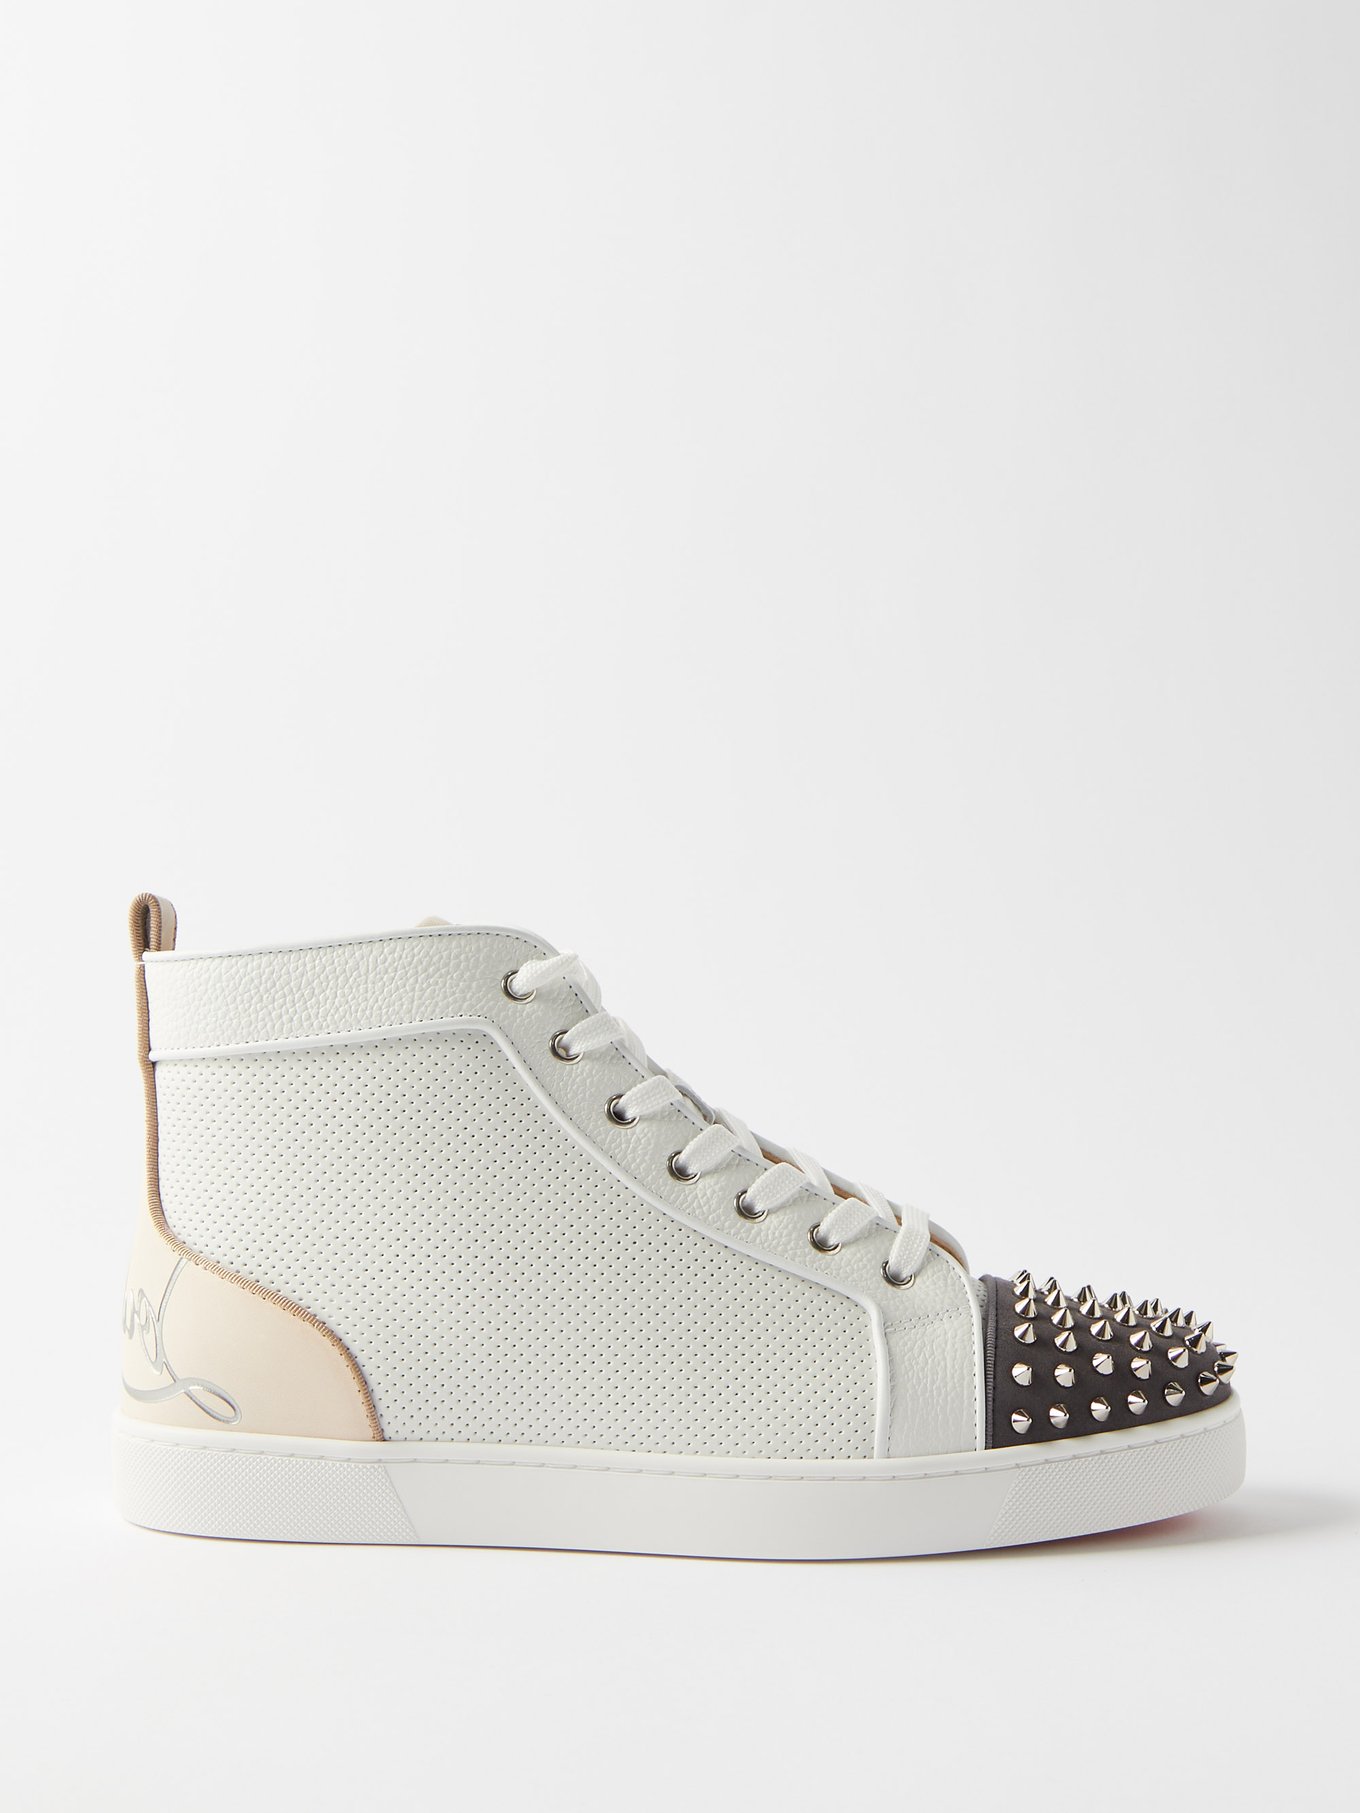 Christian Louboutin Louis Spiked Suede High-Top Sneakers - Men - Sand Suede Shoes - EU 42.5